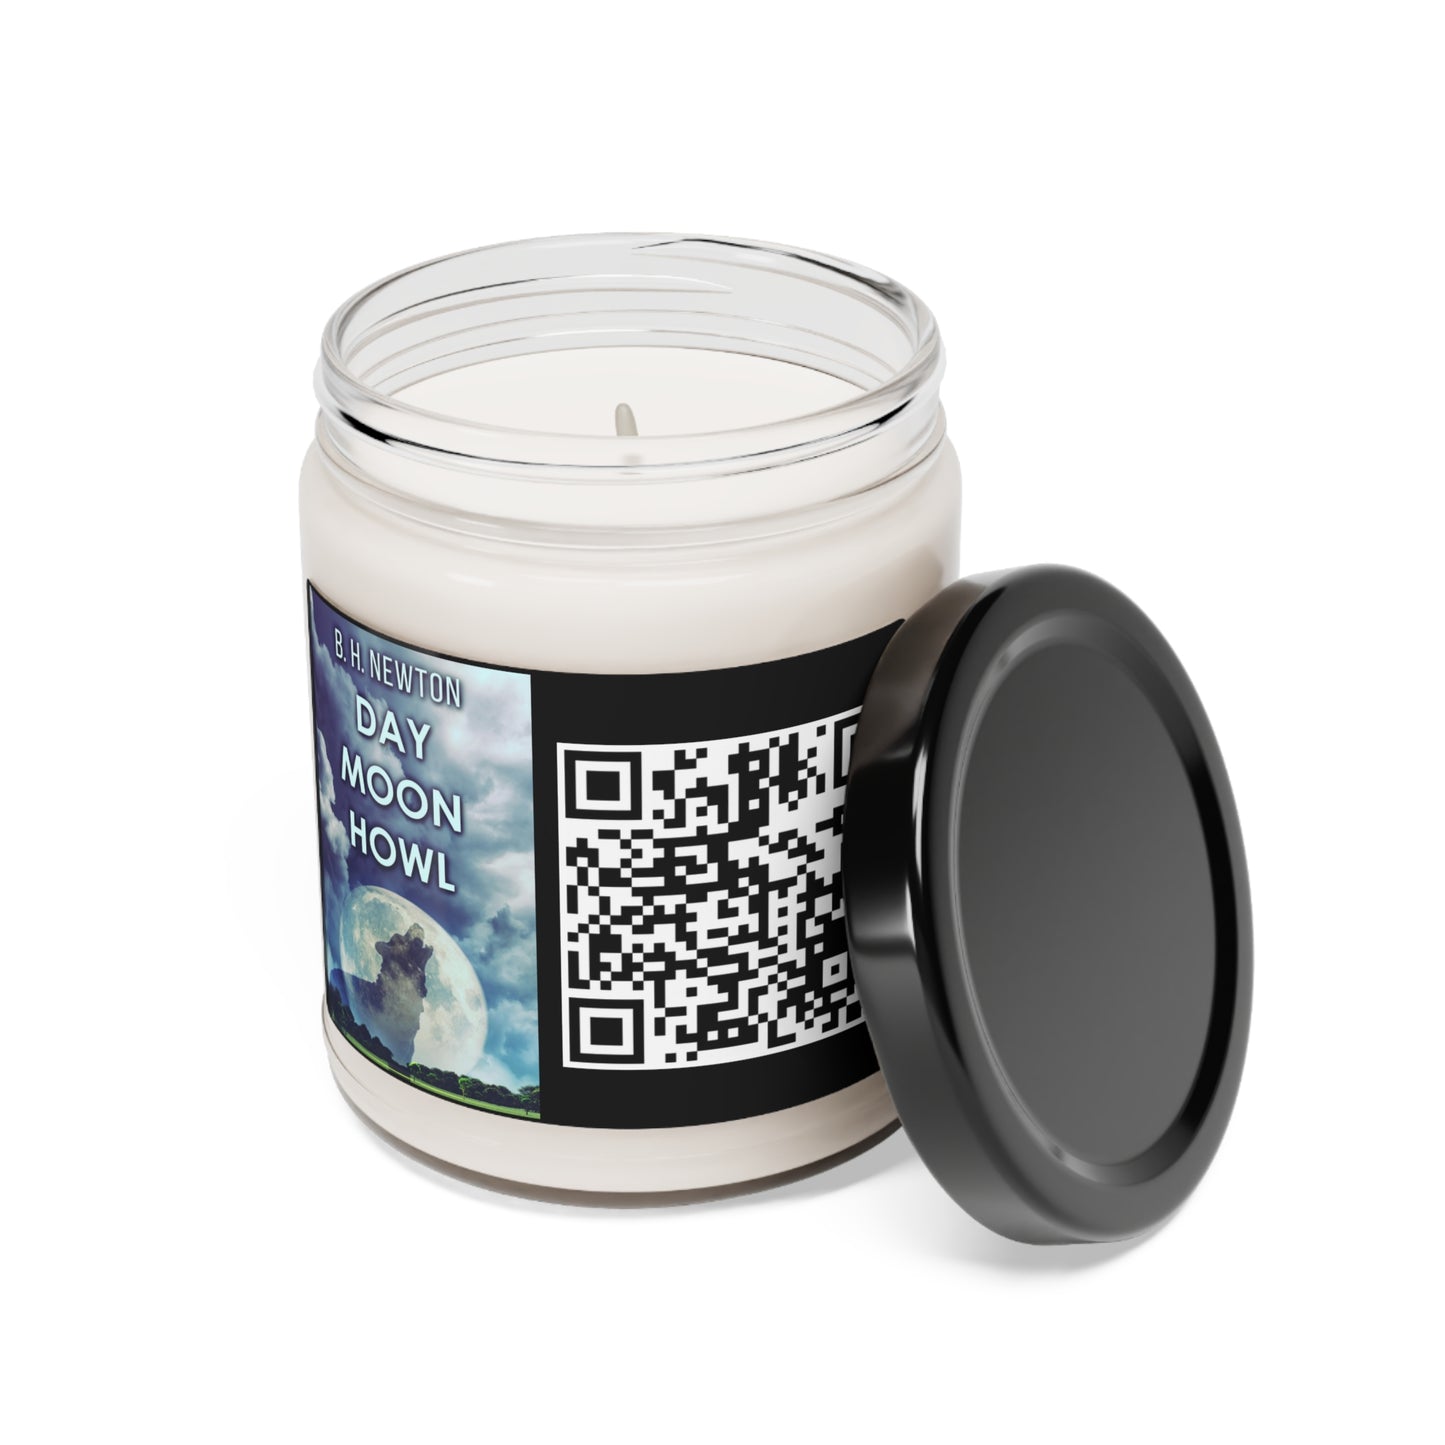 Day Moon Howl - Scented Soy Candle